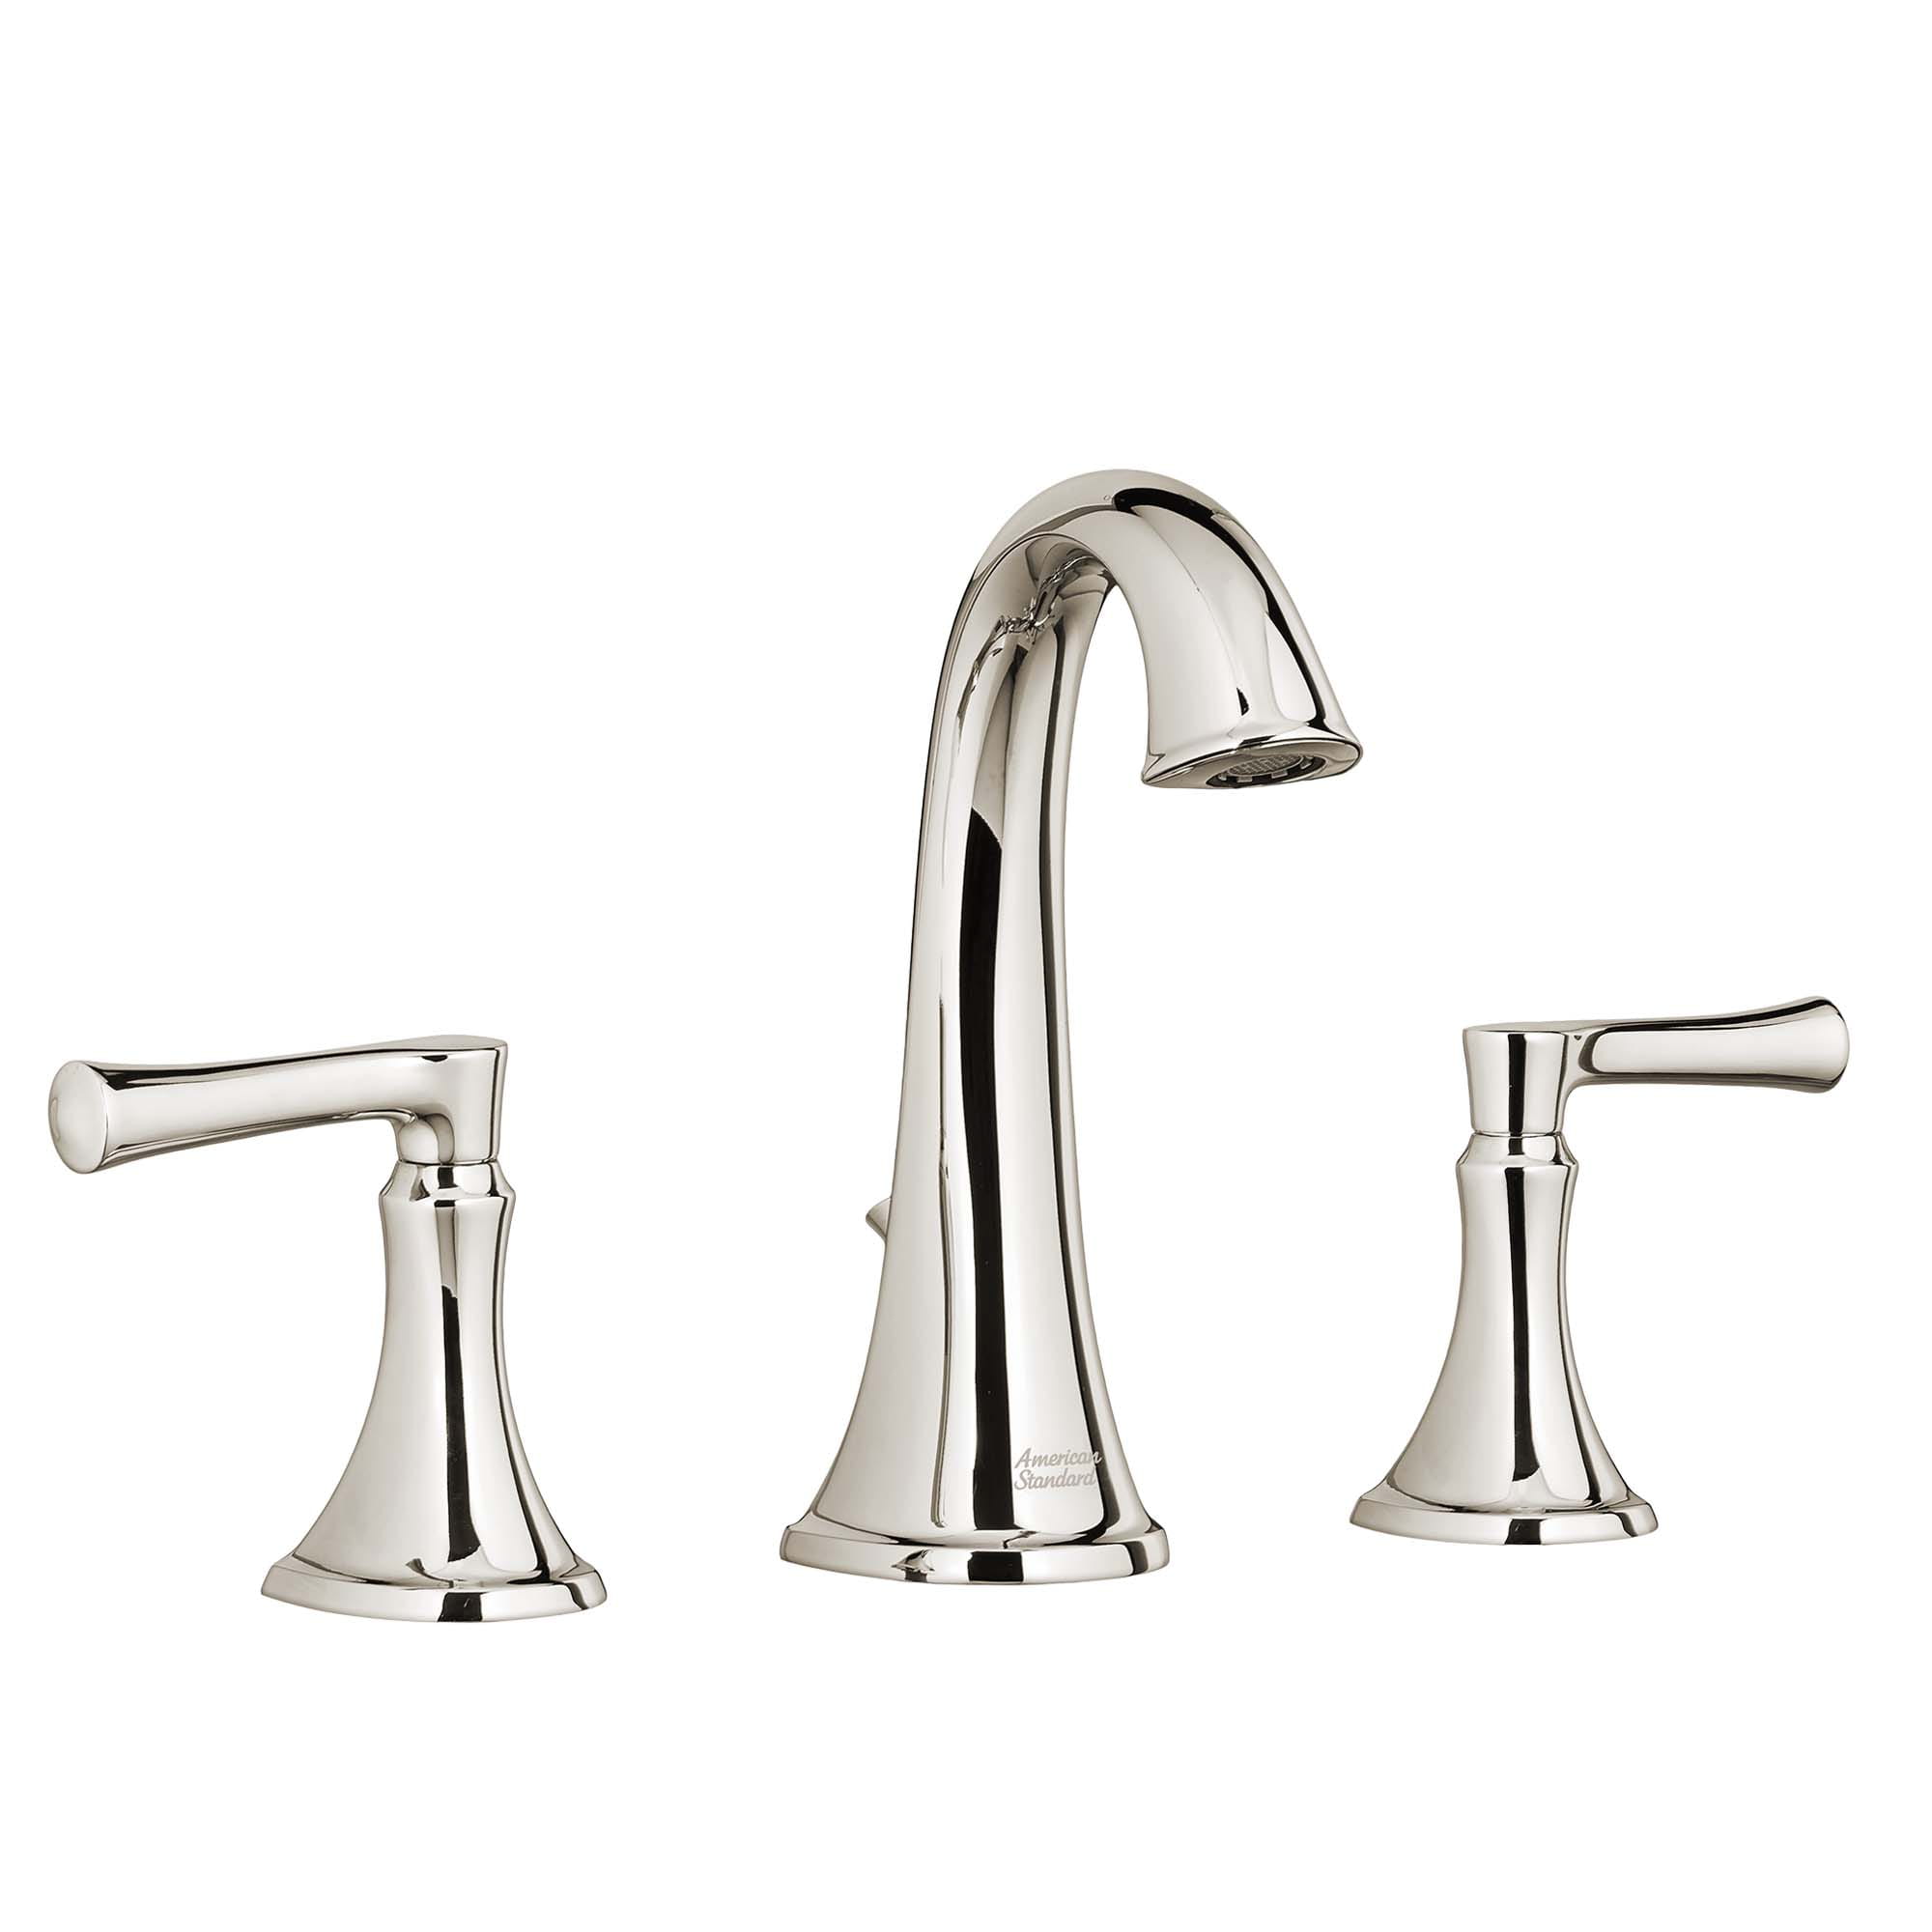 Estate 8 Inch Widespread 2 Handle Bathroom Faucet 12 gmp 45 L min With Lever Handles POLISHED  NICKEL